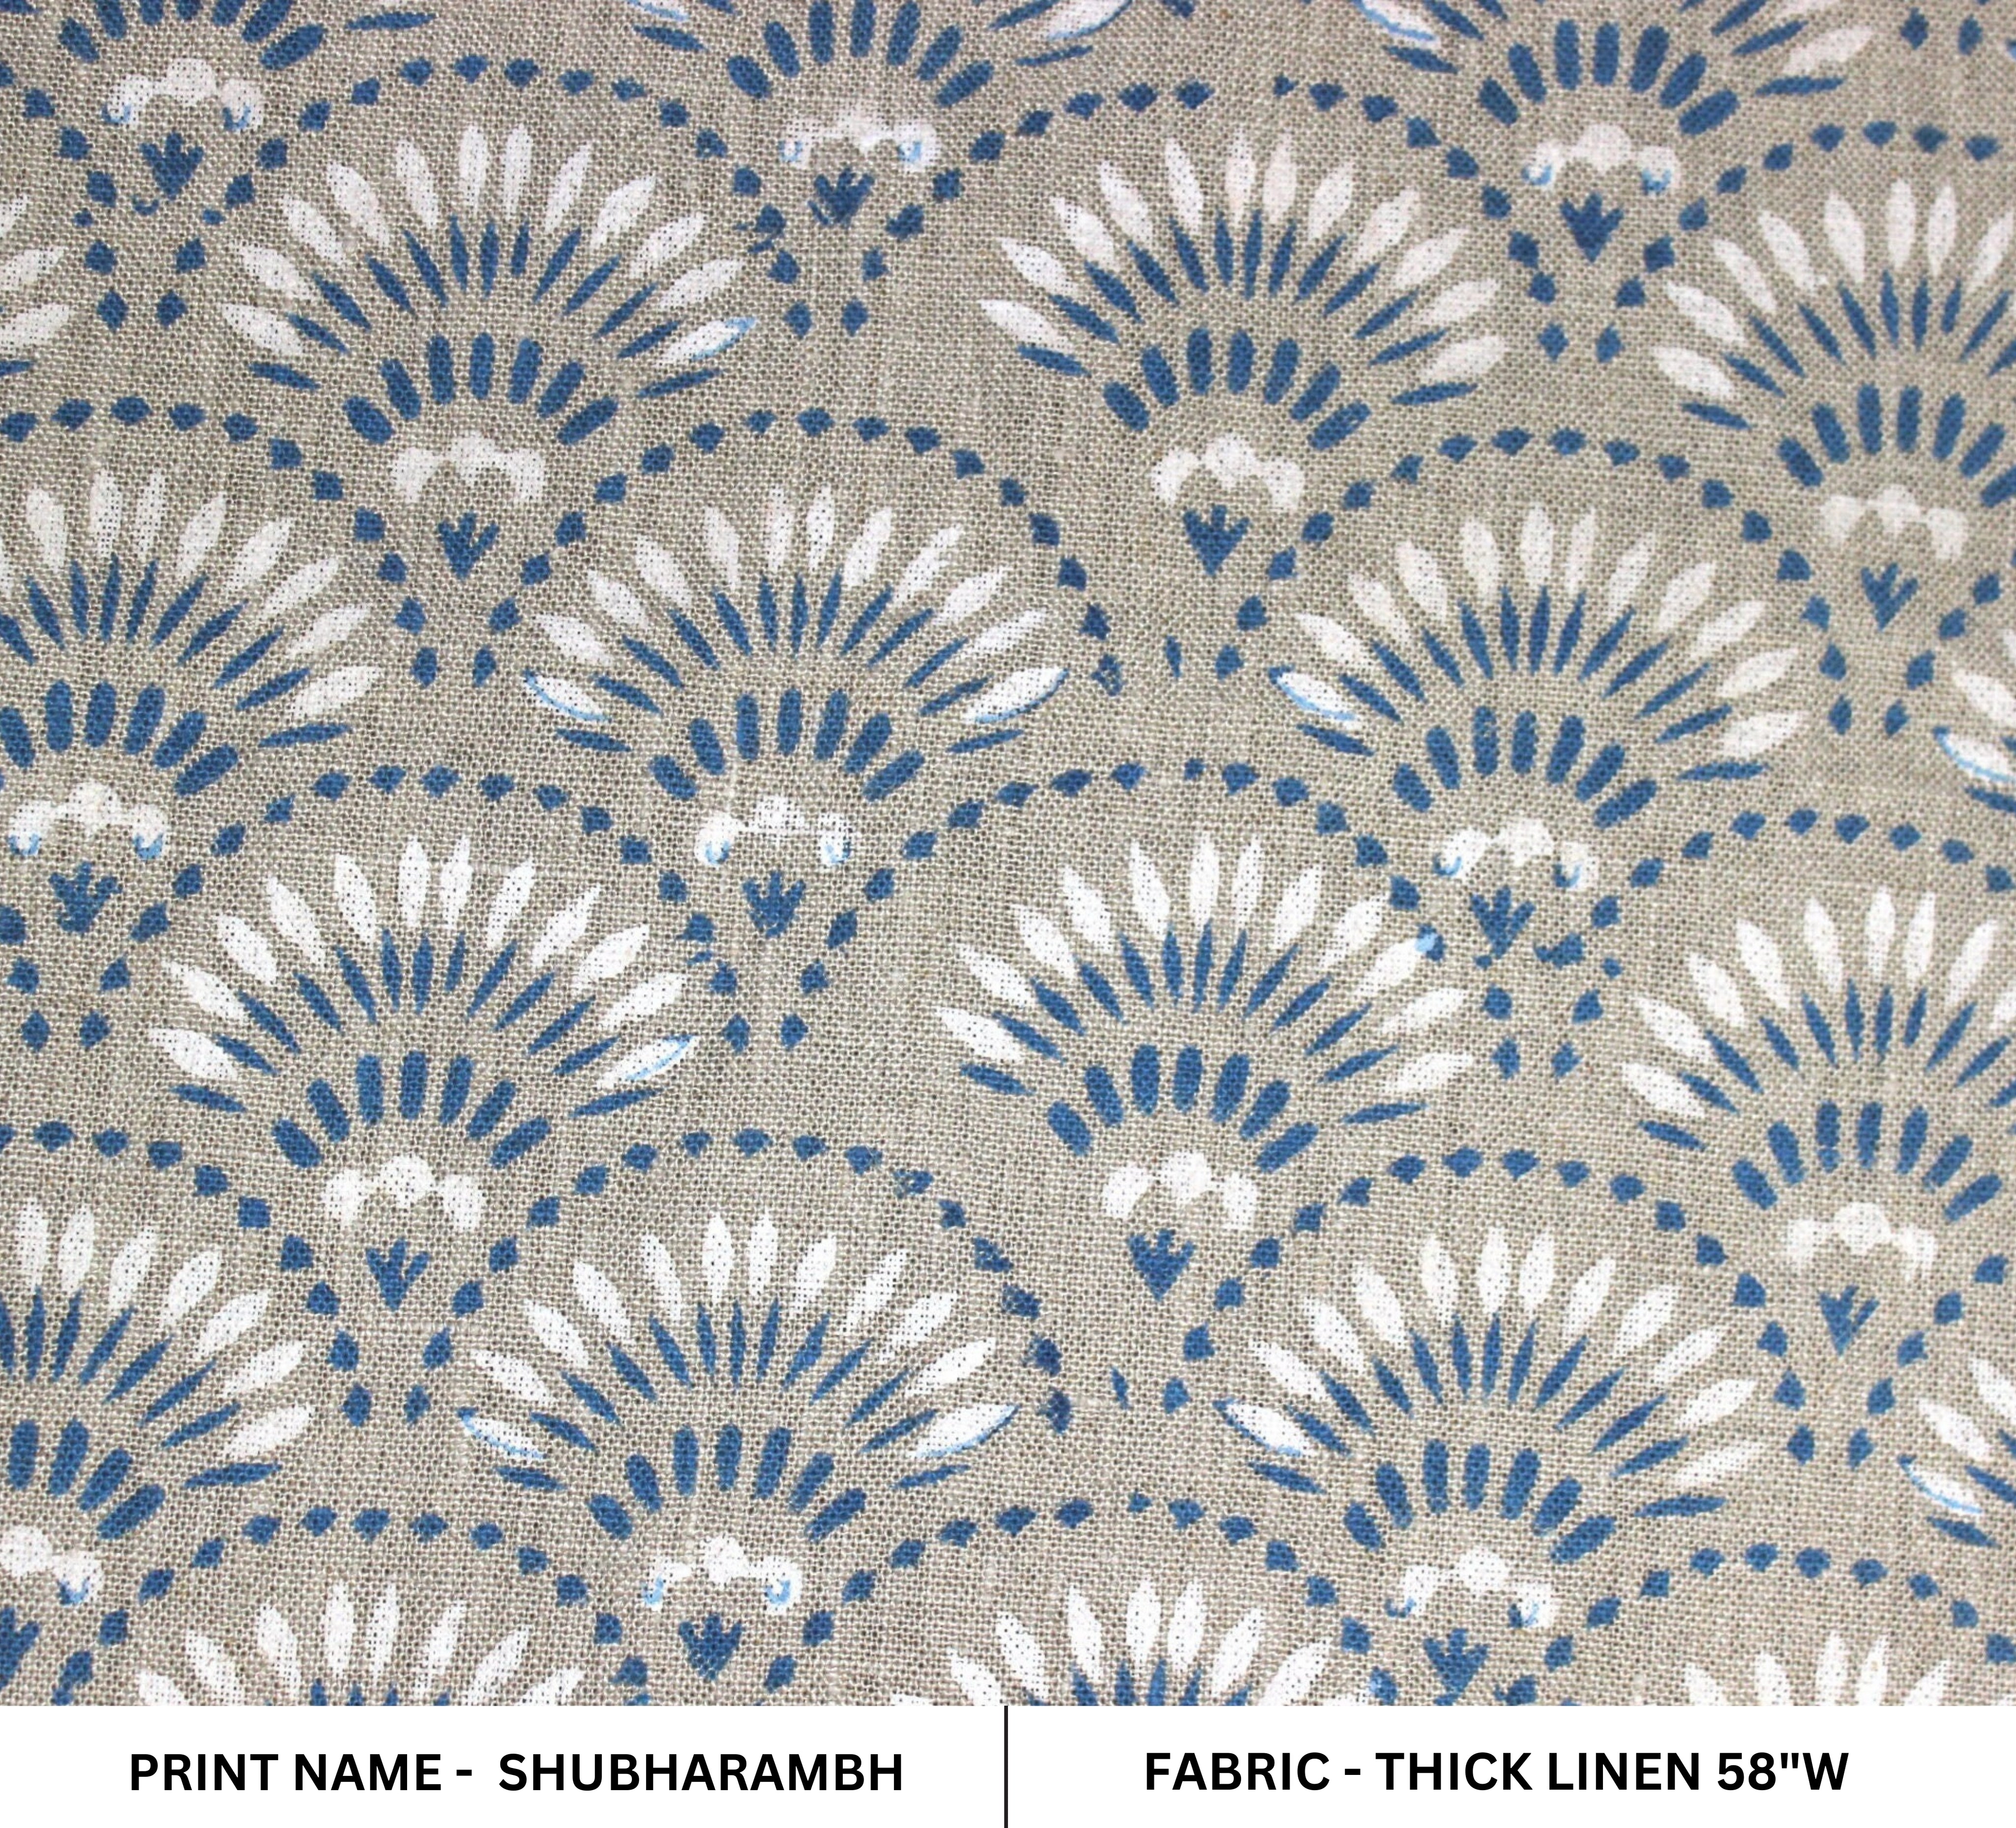 Block Print Linen Fabric, Shubharambh  Hand Block Indian Art On Heavy Handloom Linen Fabric, Upholstery&Pillow Cover Fabric By The Yard  Handmade With Natural Dyes